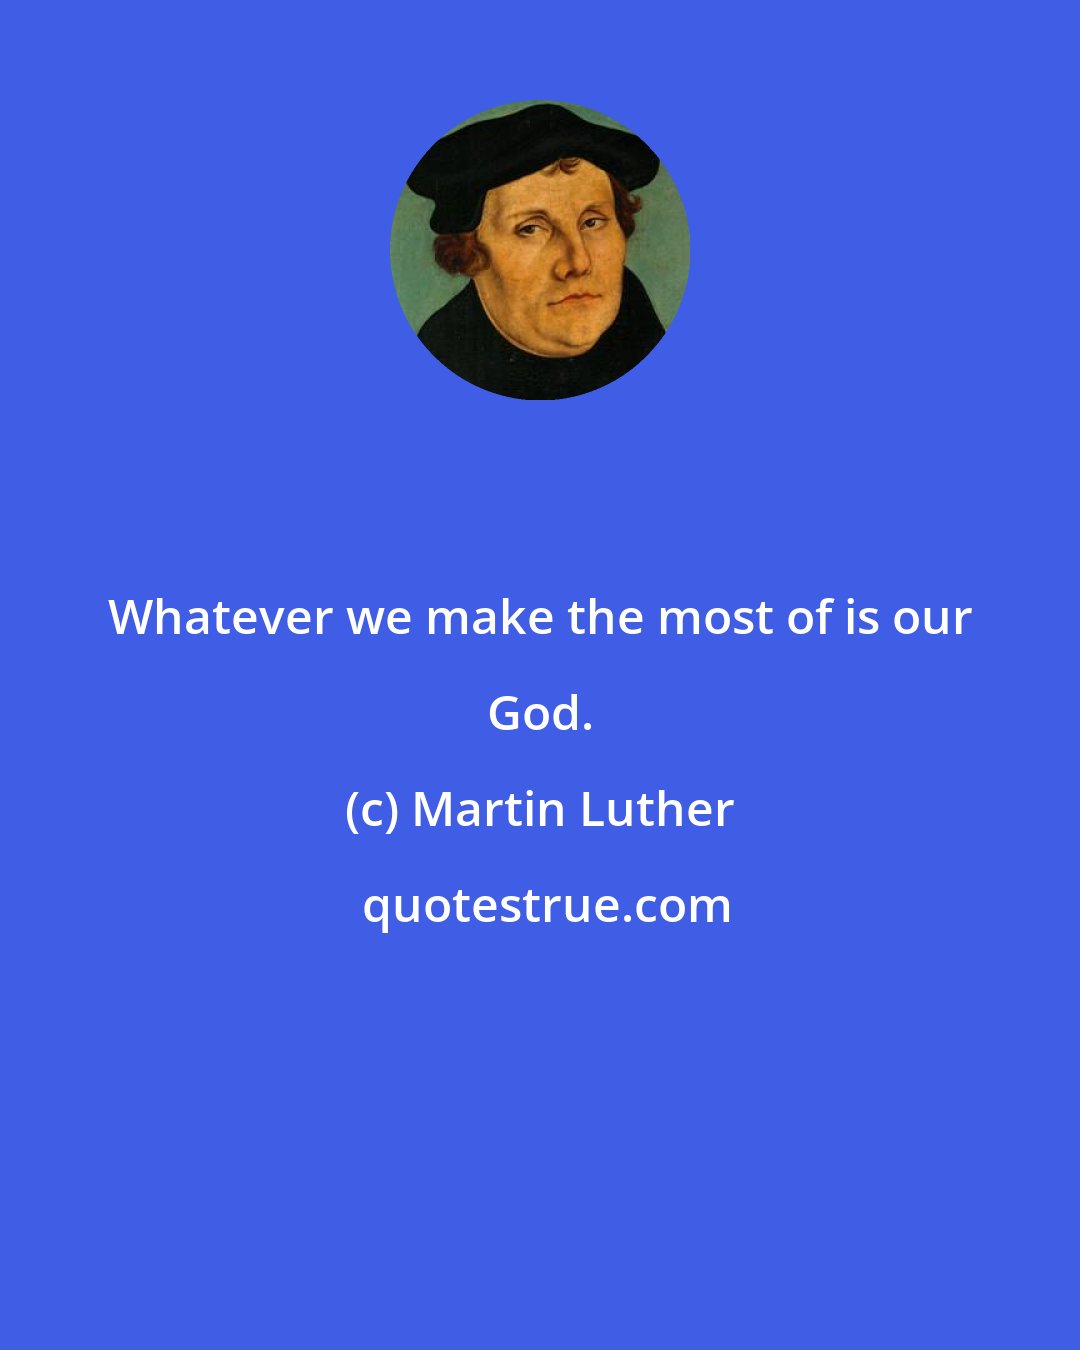 Martin Luther: Whatever we make the most of is our God.